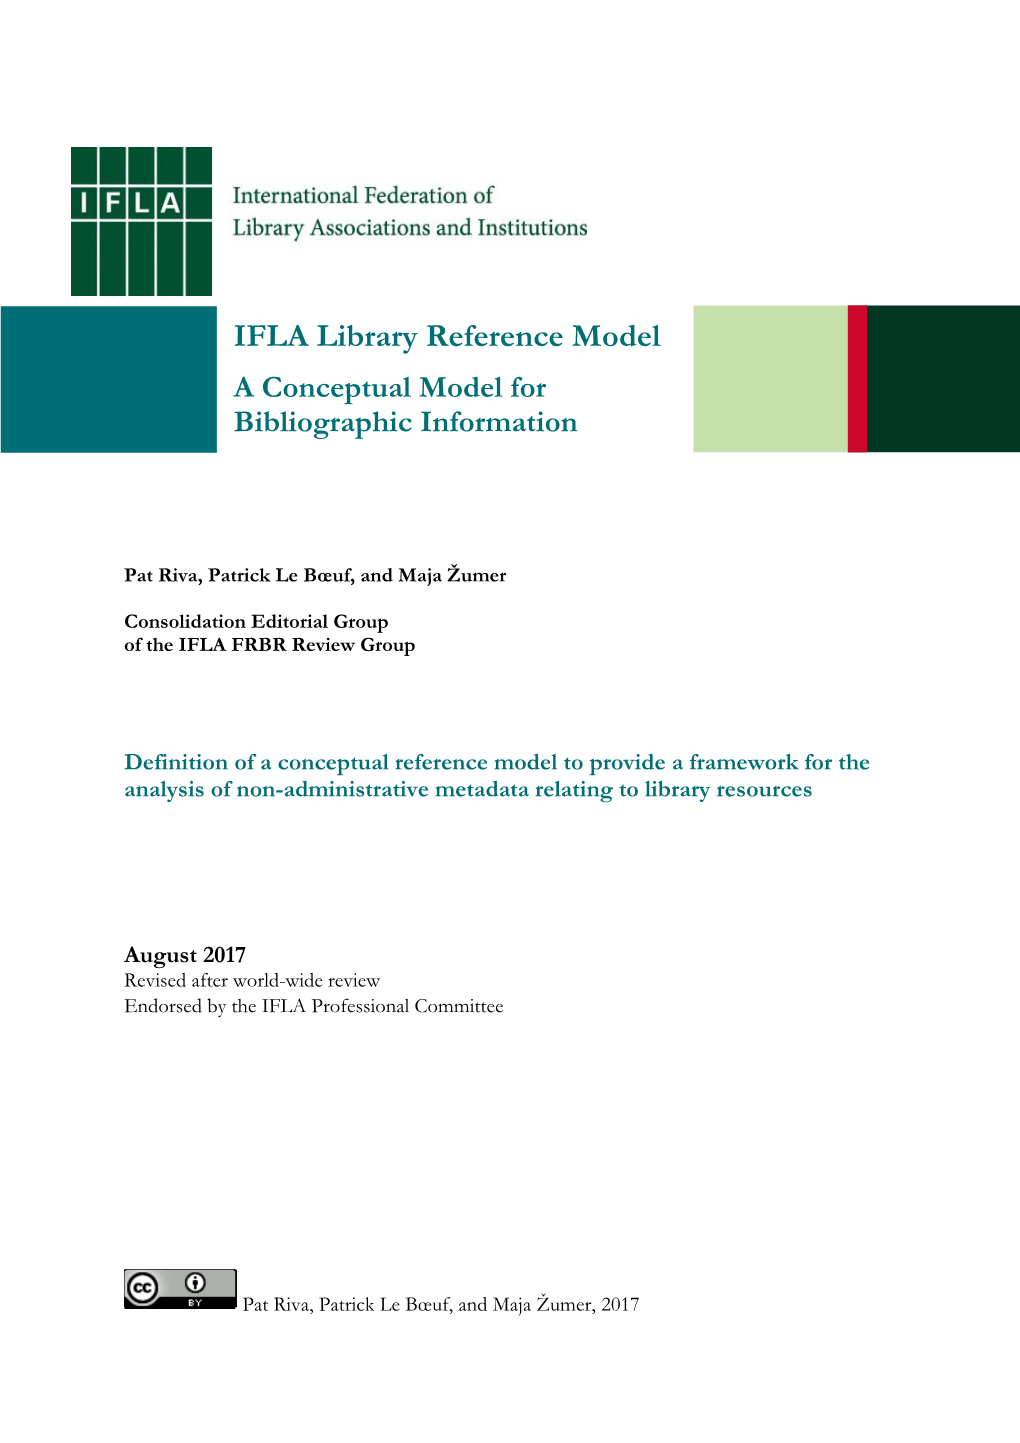 IFLA Library Reference Model